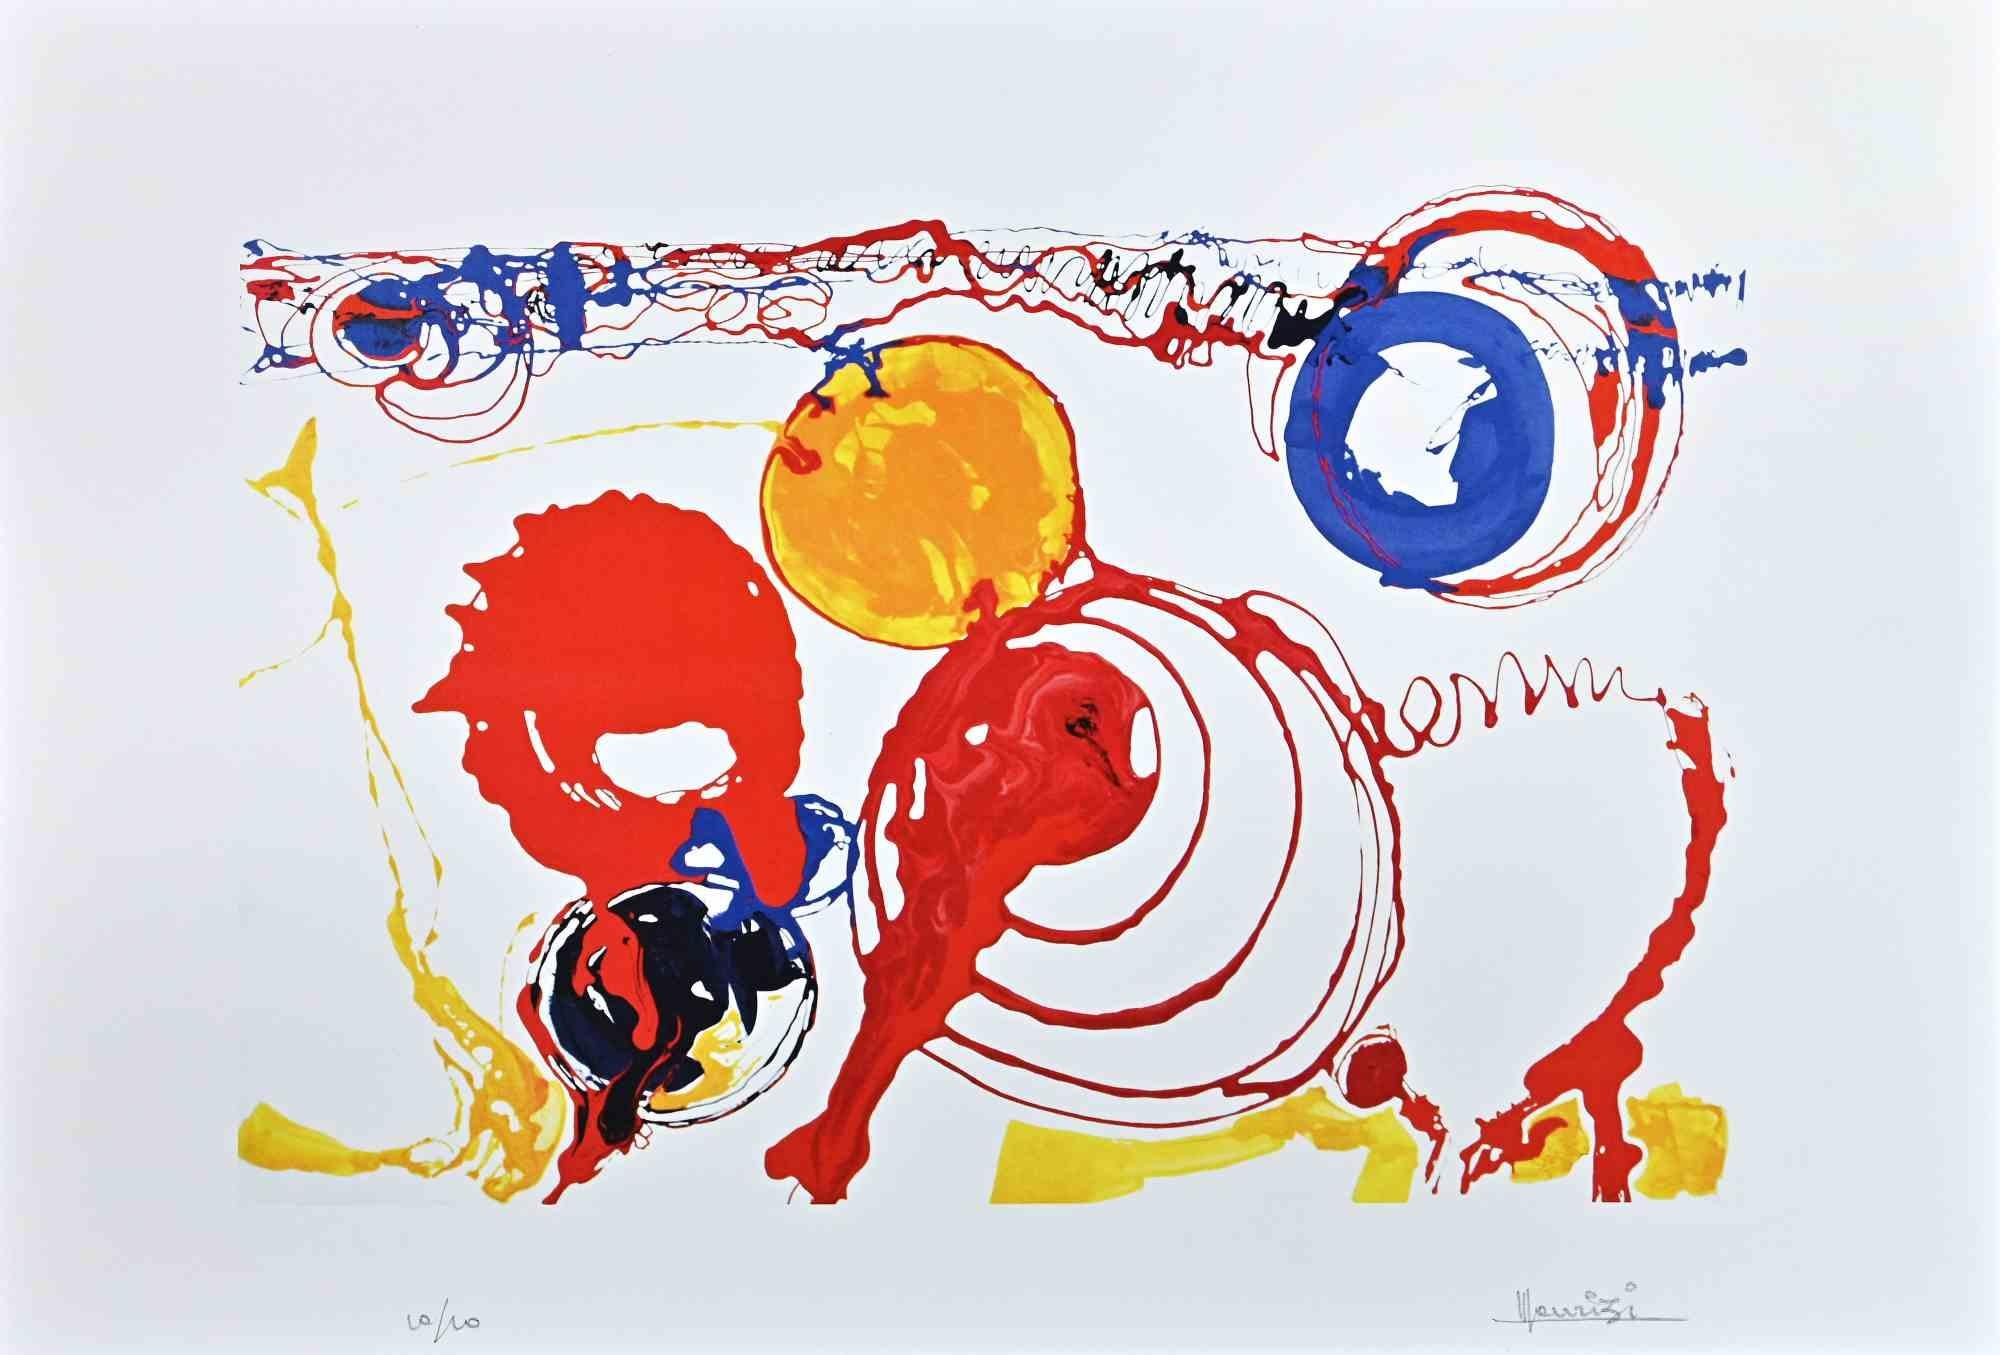 Composition is an original screen print on white paper realized by Italian artist Tonino Maurizi.

Hand-signed on the lower right.

Numbered on the lower left, edition of 10/10 prints.

Very good condition.